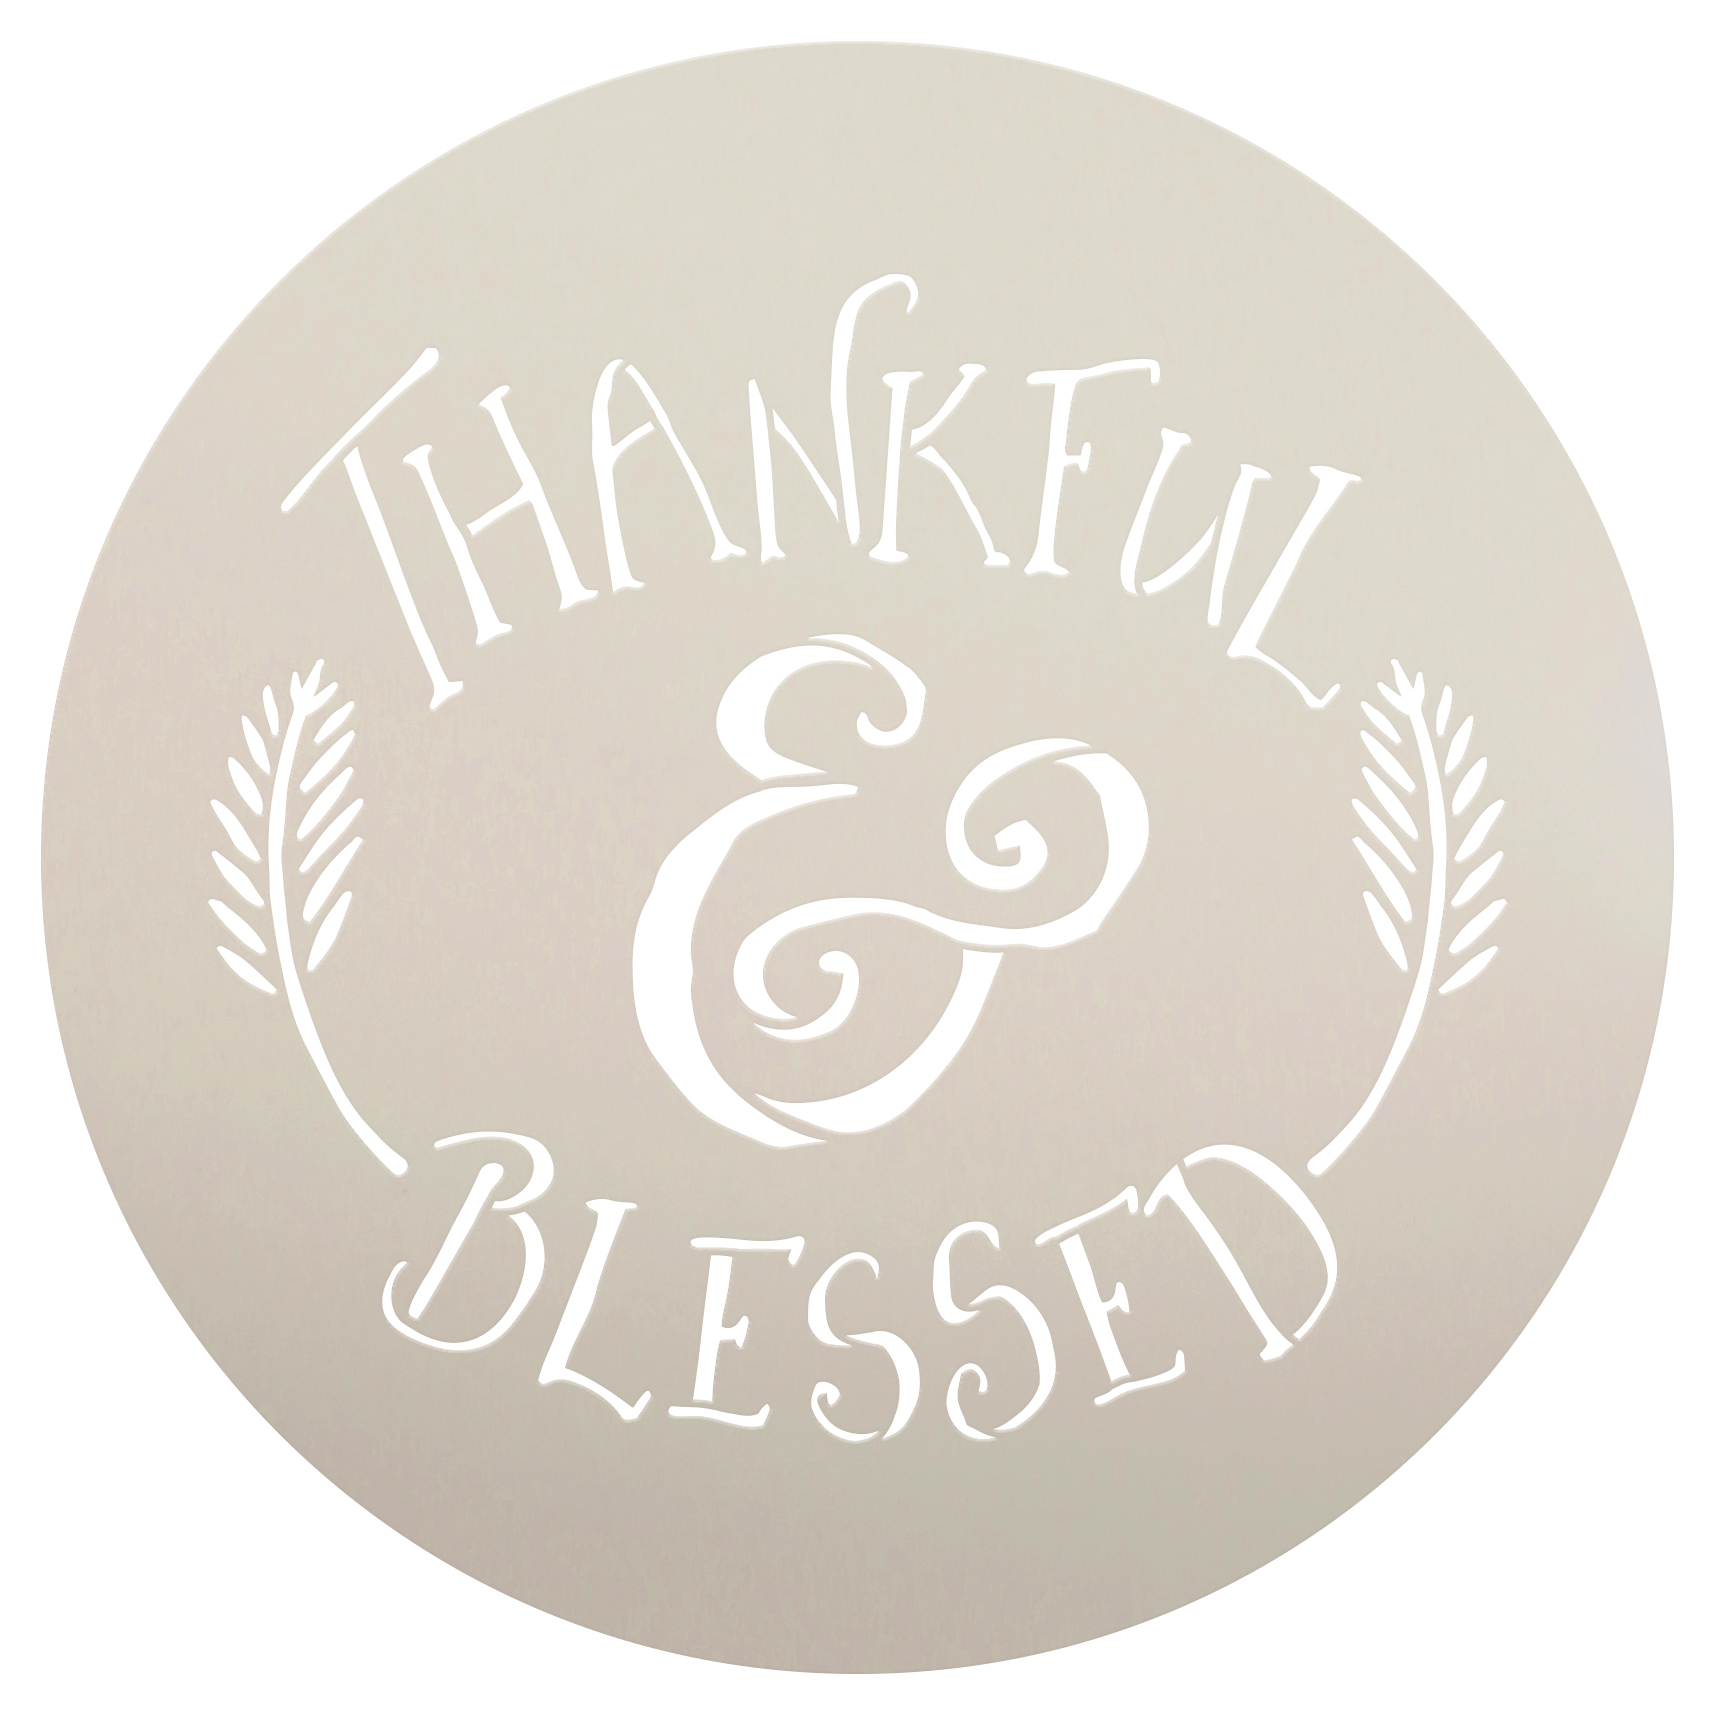 Thankful and Blessed Stencil by StudioR12 | Reusable Mylar Template | Farmhouse Style | DIY | 9.5" Round | Small